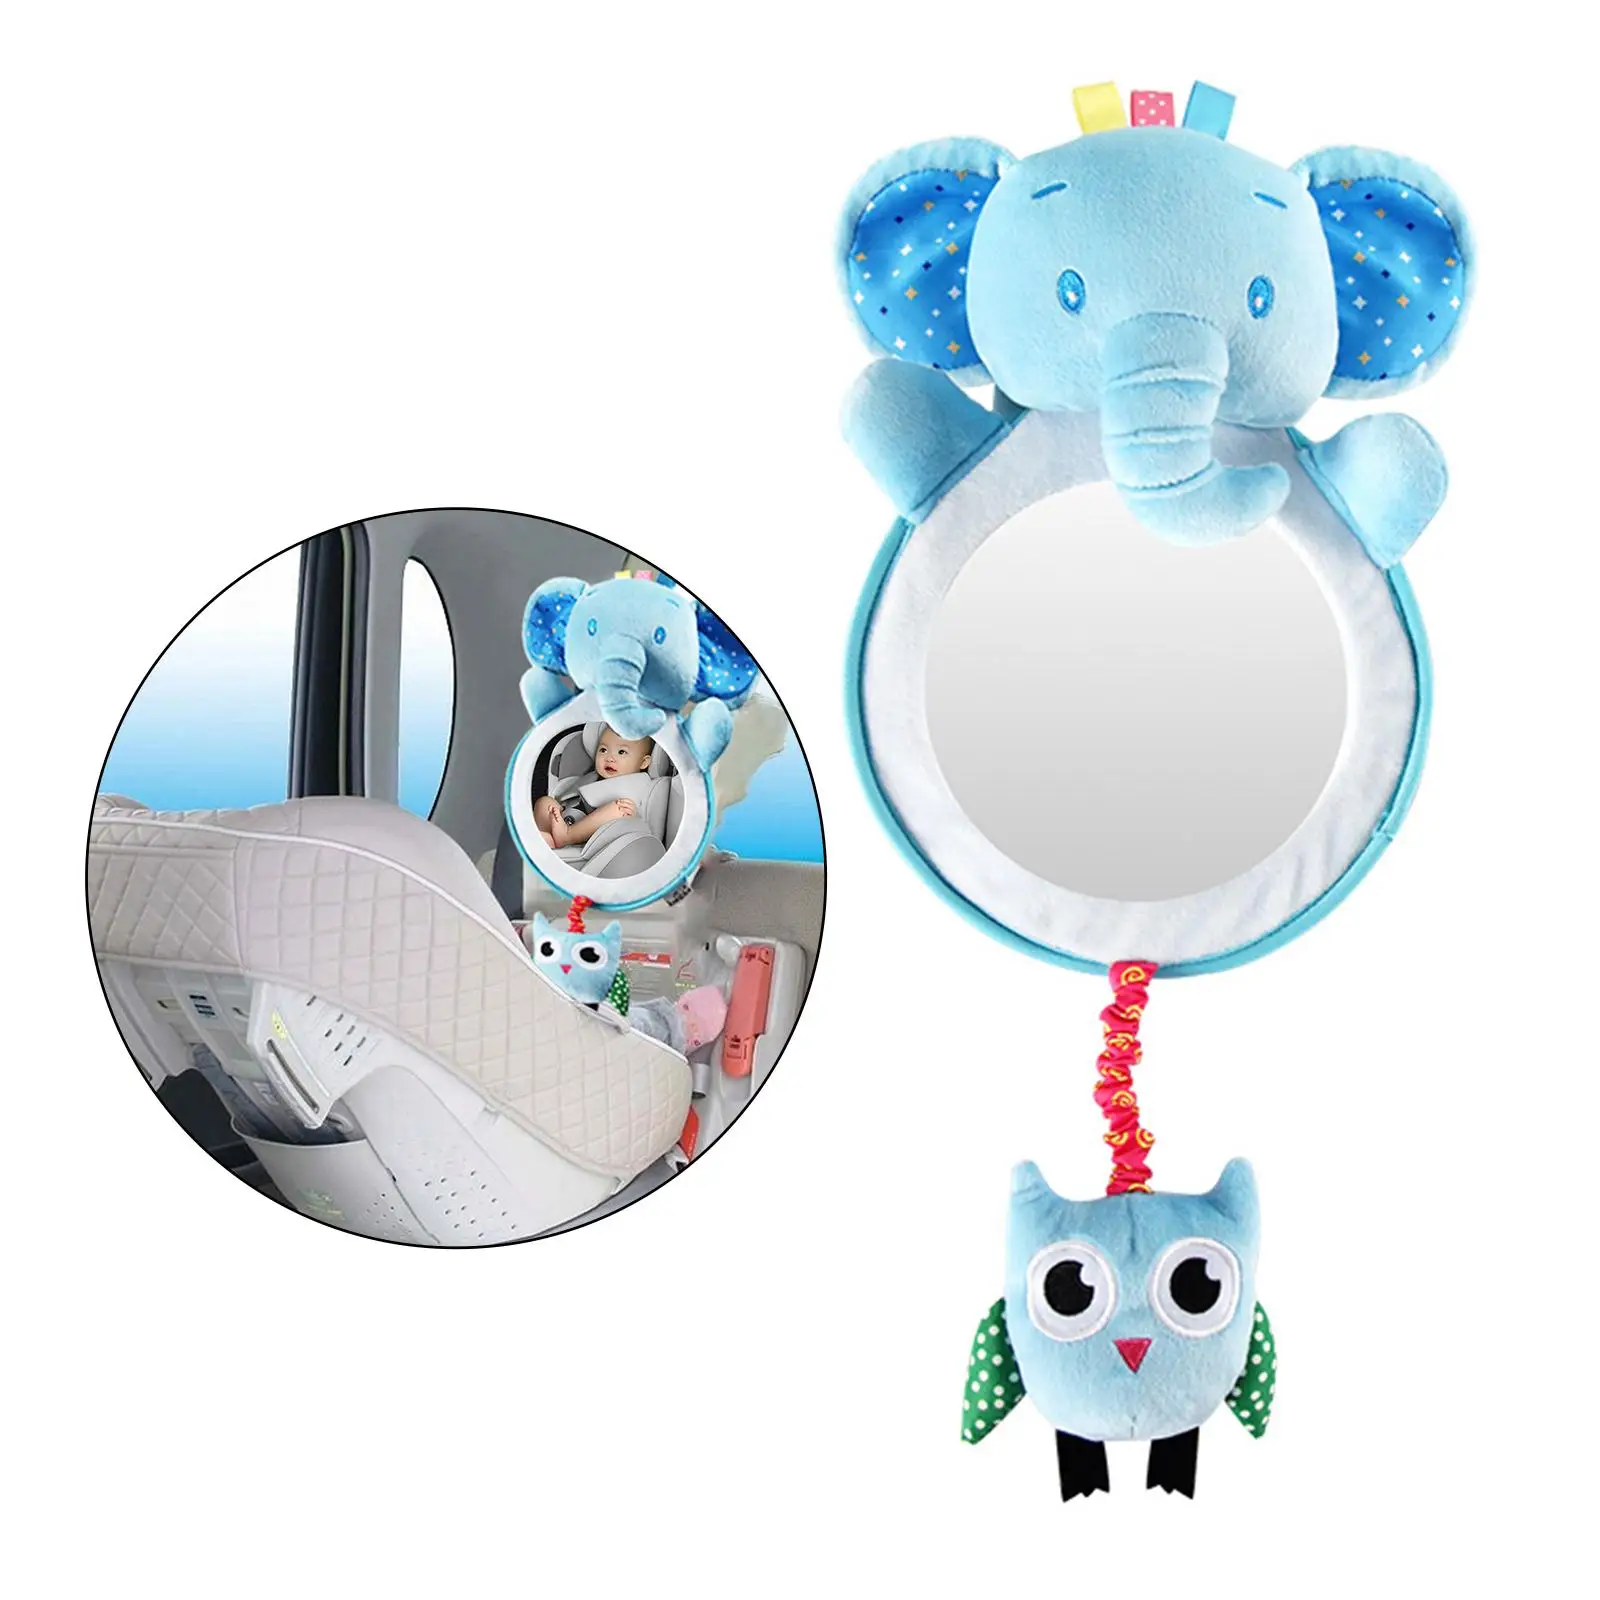 Adjustable Baby Mirror Keep Visible Rearview Mirror Back Seat for Kids